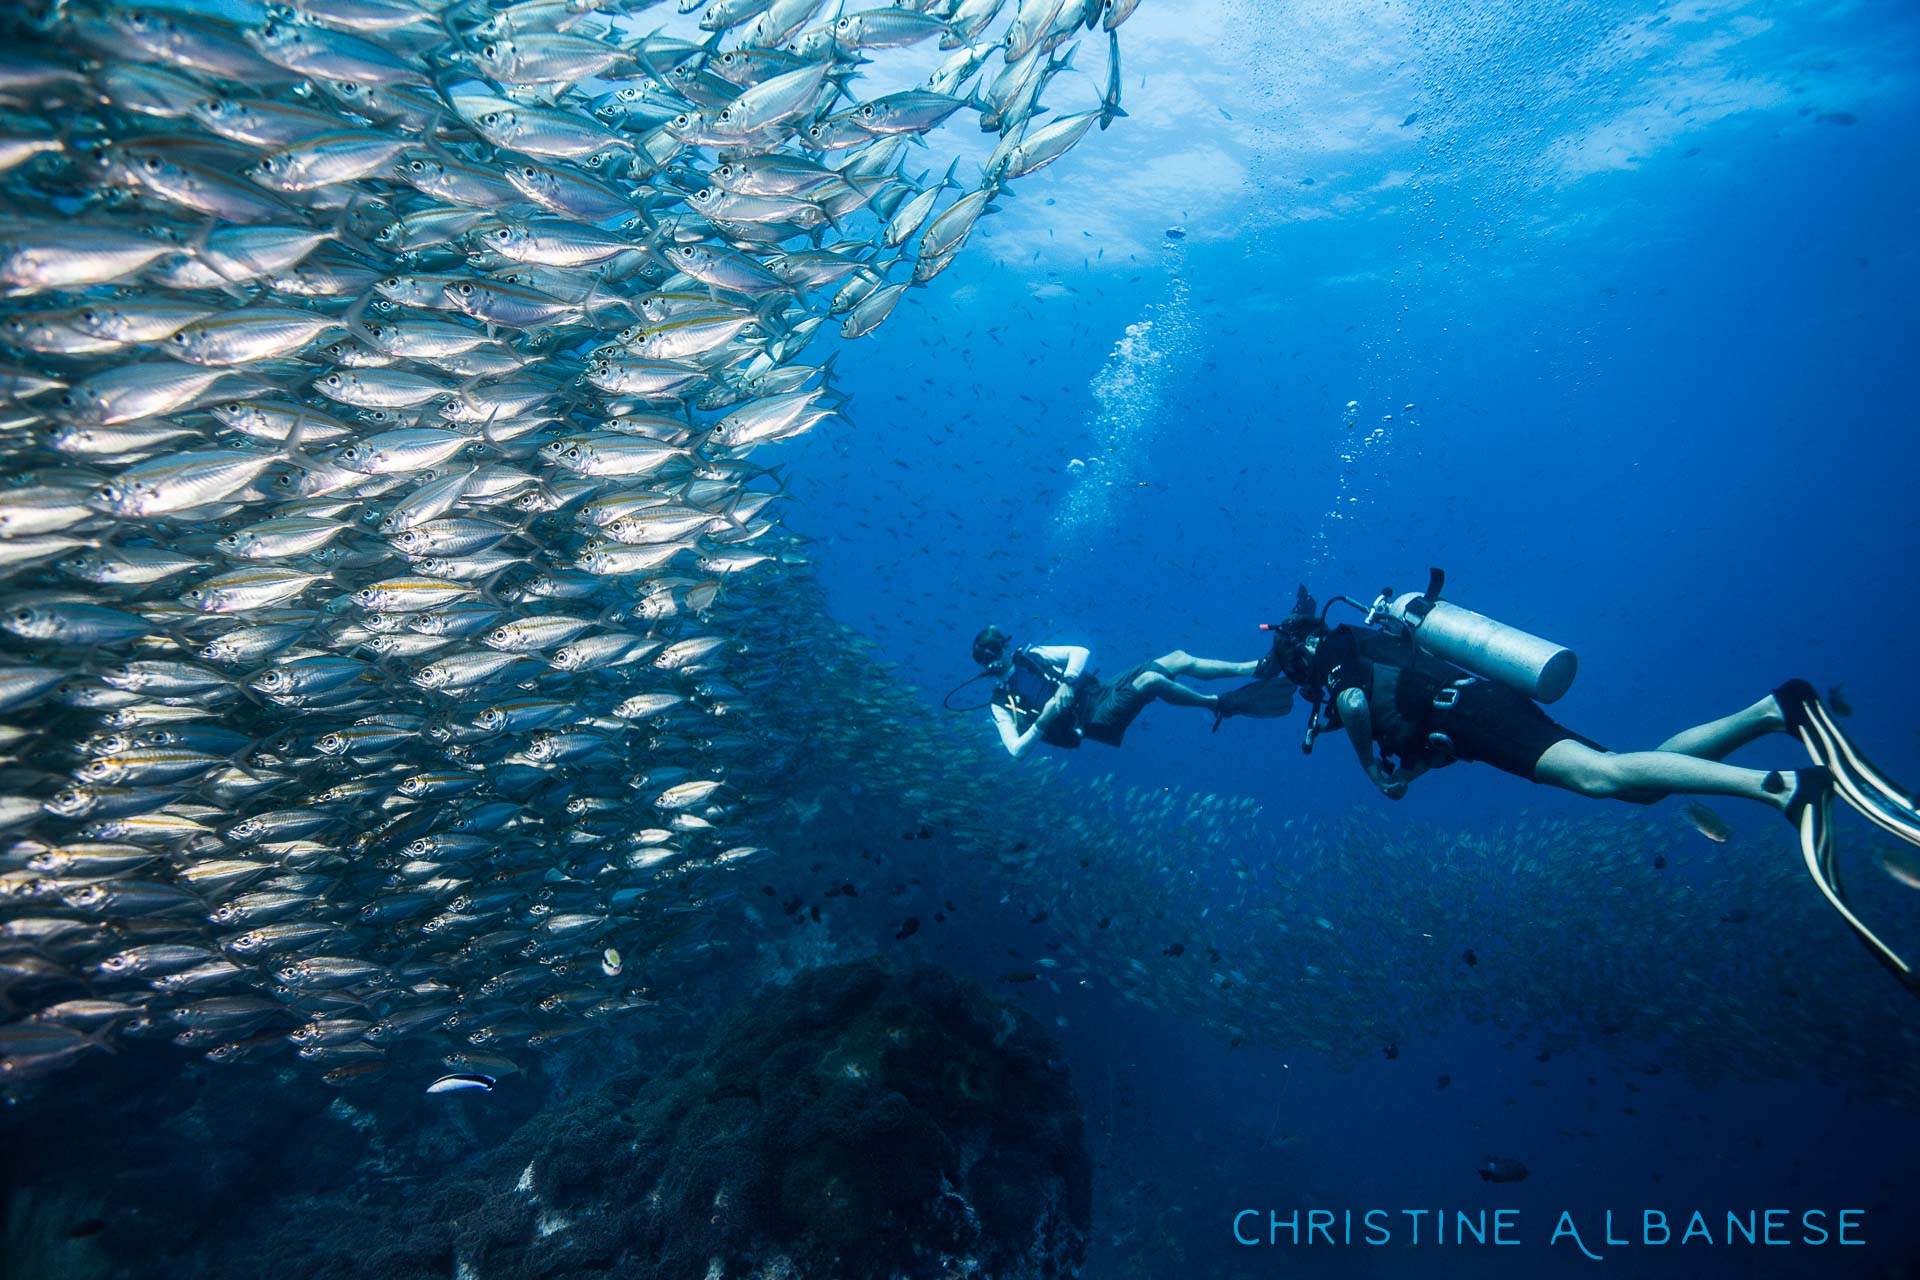 Chumphon Pinnacle is home to all kinds of amazing things! Definitely one of my favorite dive sites around Koh Tao. 😍

#underwater #underwaterphotography #uwphotography #EarthCapture #padi #wideangle #canon6d #canon1740 #ikelite #ds160 #scuba #scubadiving #divinglife #eatsleepscuba #scubaearth #natgeo #chumphon #kohtao #thailand #ocean #marinelife #adventure #discover #underwaterdiving #schoolingfish #abundance #awesome